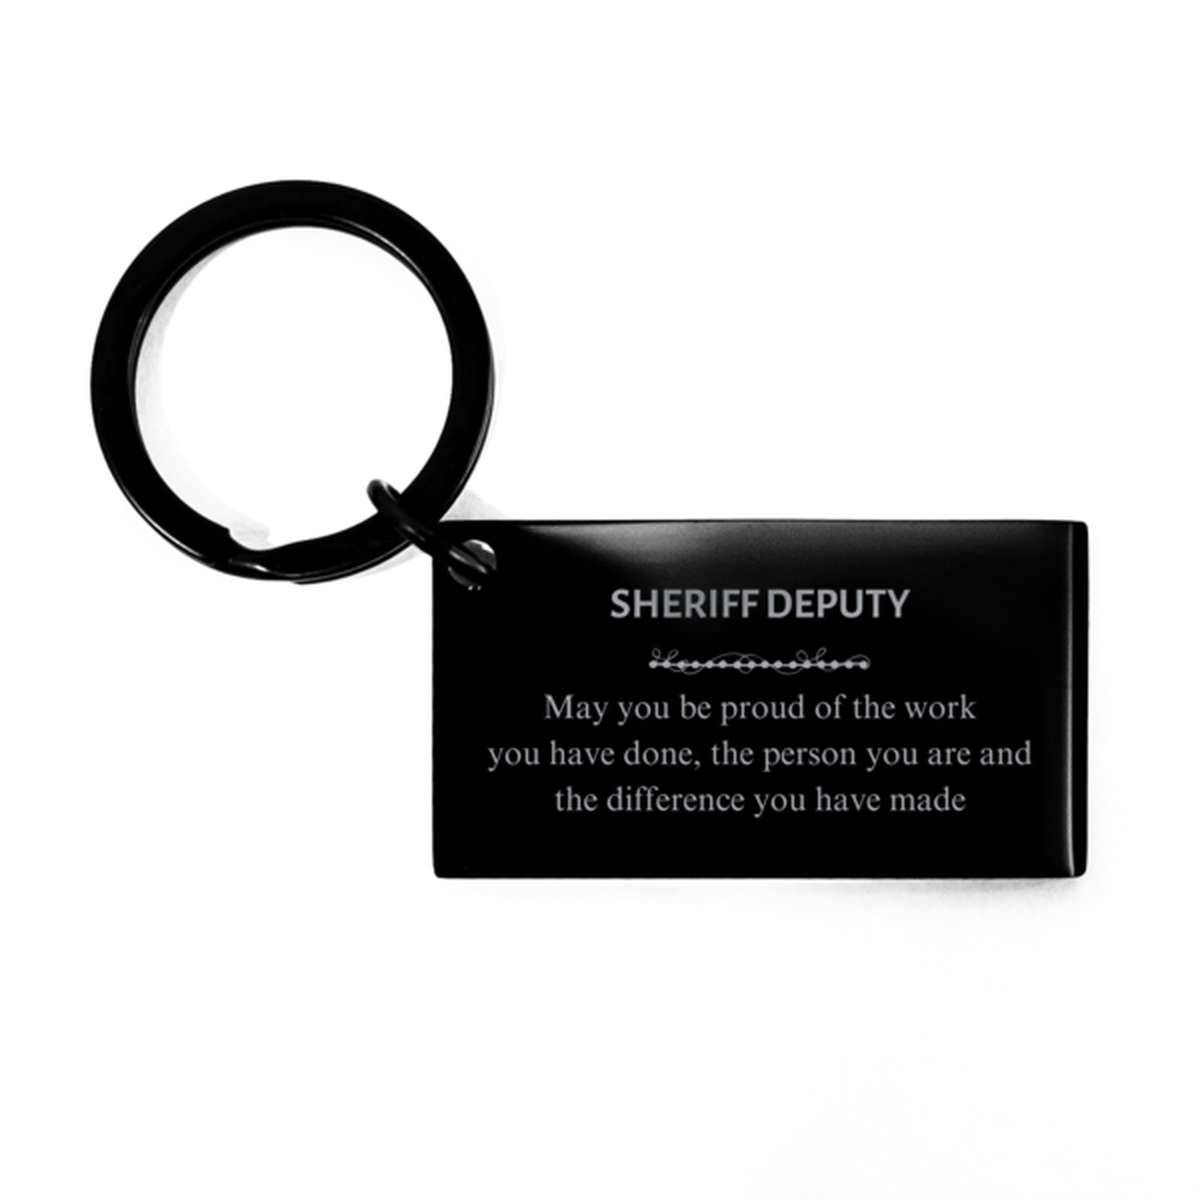 Vice-principal May you be proud of the work you have done, Retirement Sheriff Deputy Keychain for Colleague Appreciation Gifts Amazing for Sheriff Deputy